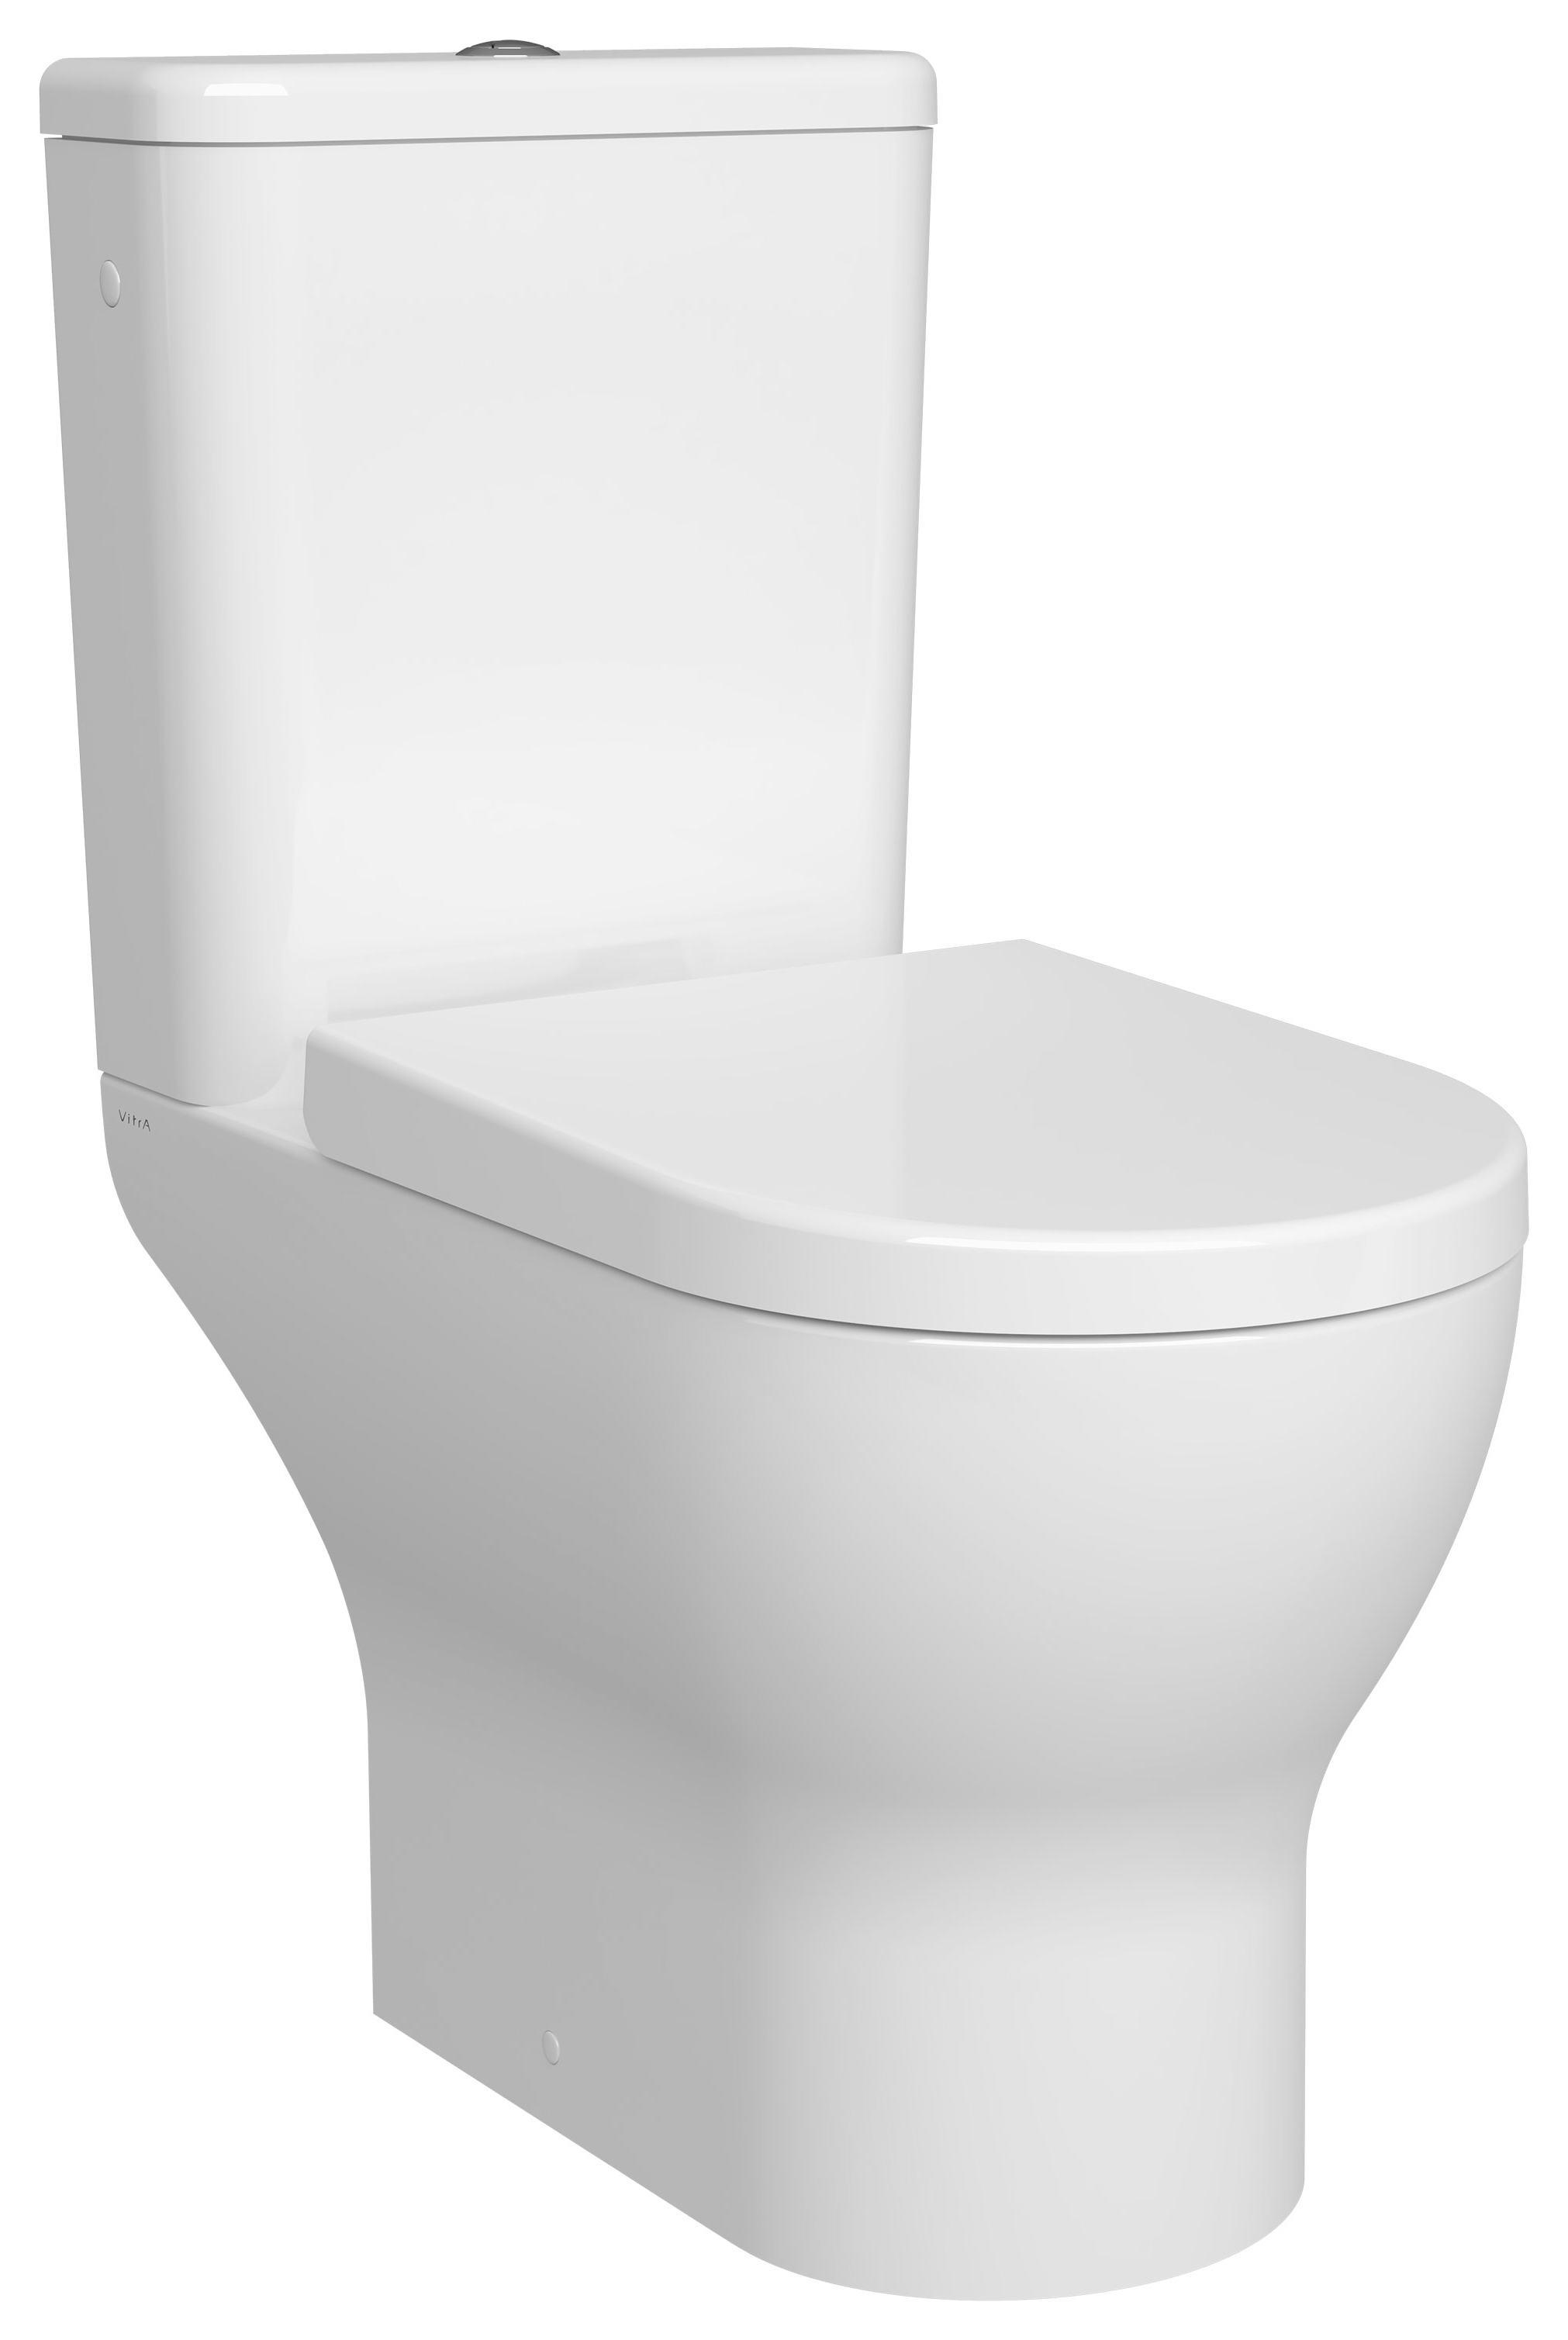 Kerala Round Smooth Flush Open Back Close Coupled Toilet Pan, Cistern & Soft Close Seat